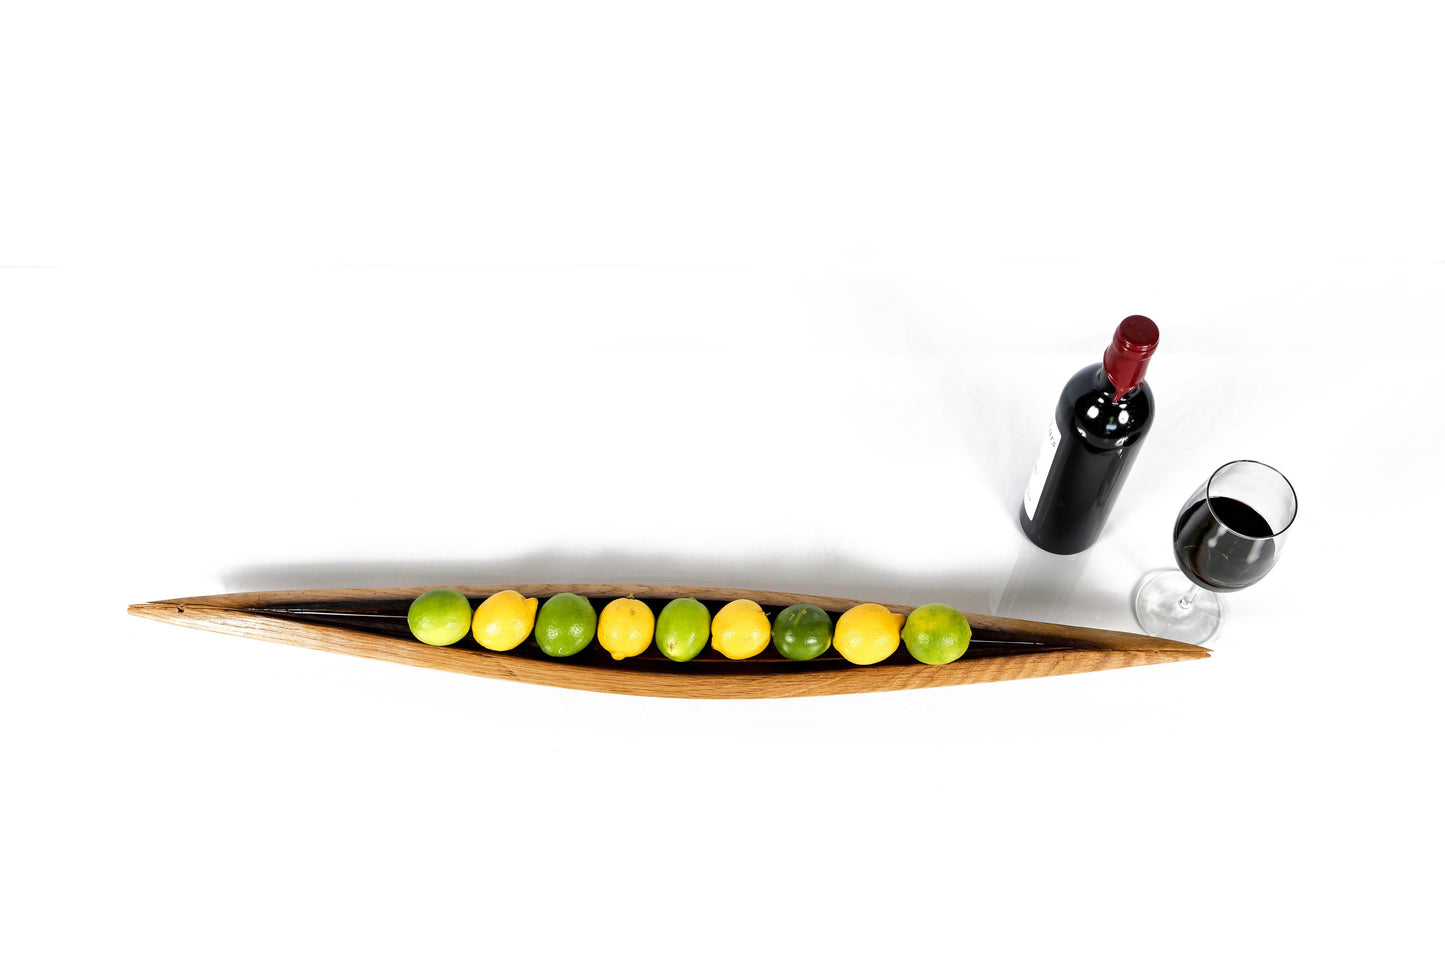 Wine Stave Fruit Tray - Batur - Made from reclaimed California wine barrels. 100% Recycled!